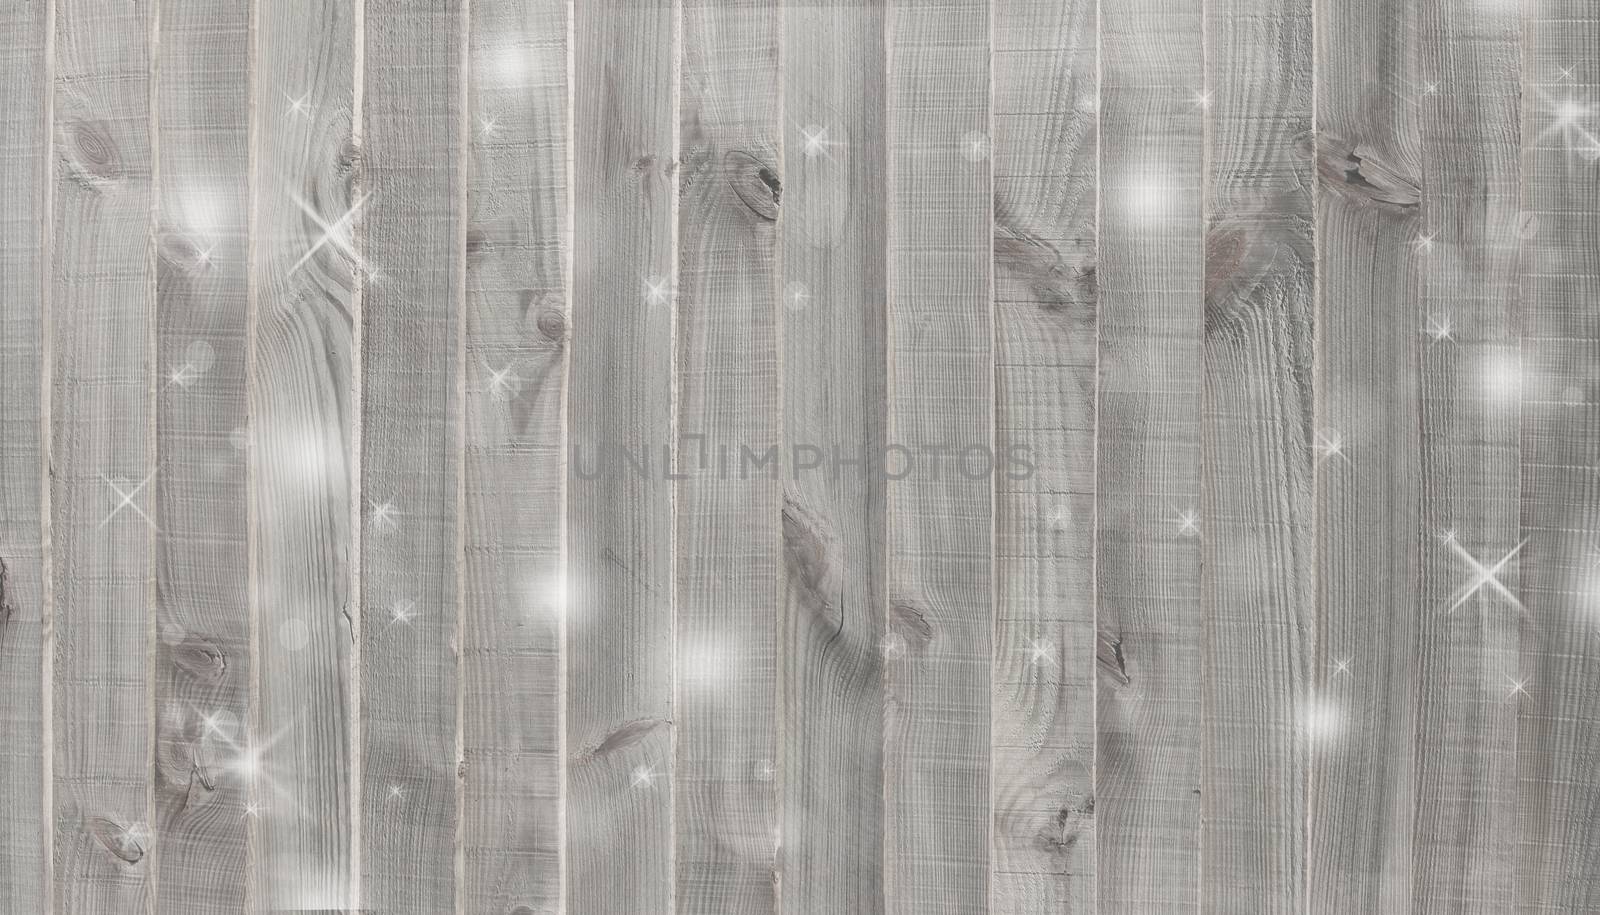 Brown wood texture with white snow for Christmas background by NelliPolk